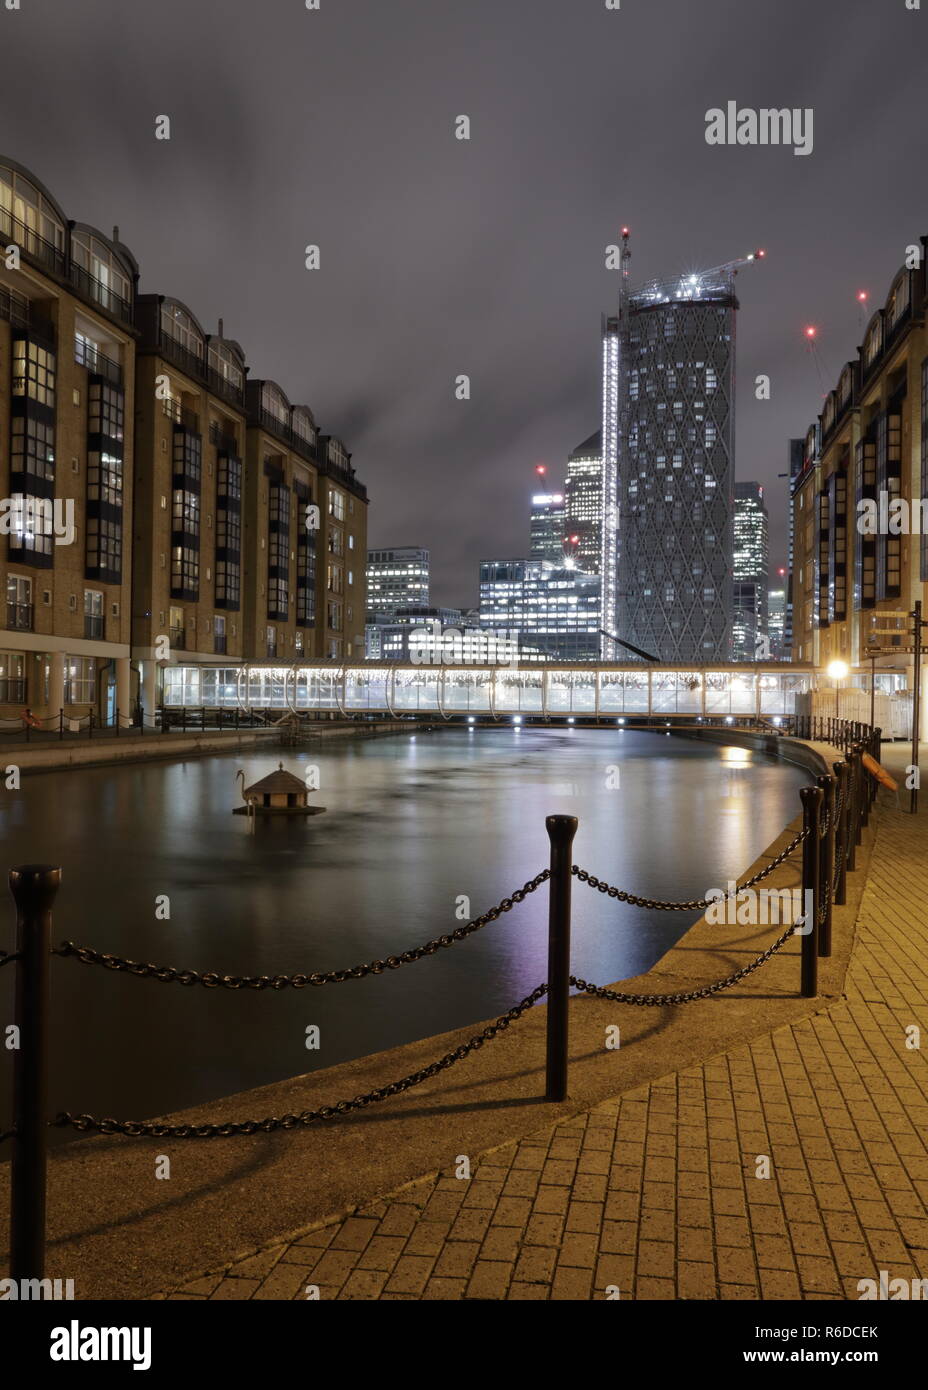 Doubletree Docklands Nelson Dock Pier next to riverside Thames. Night London with beautiful reflections and building lights. Stock Photo